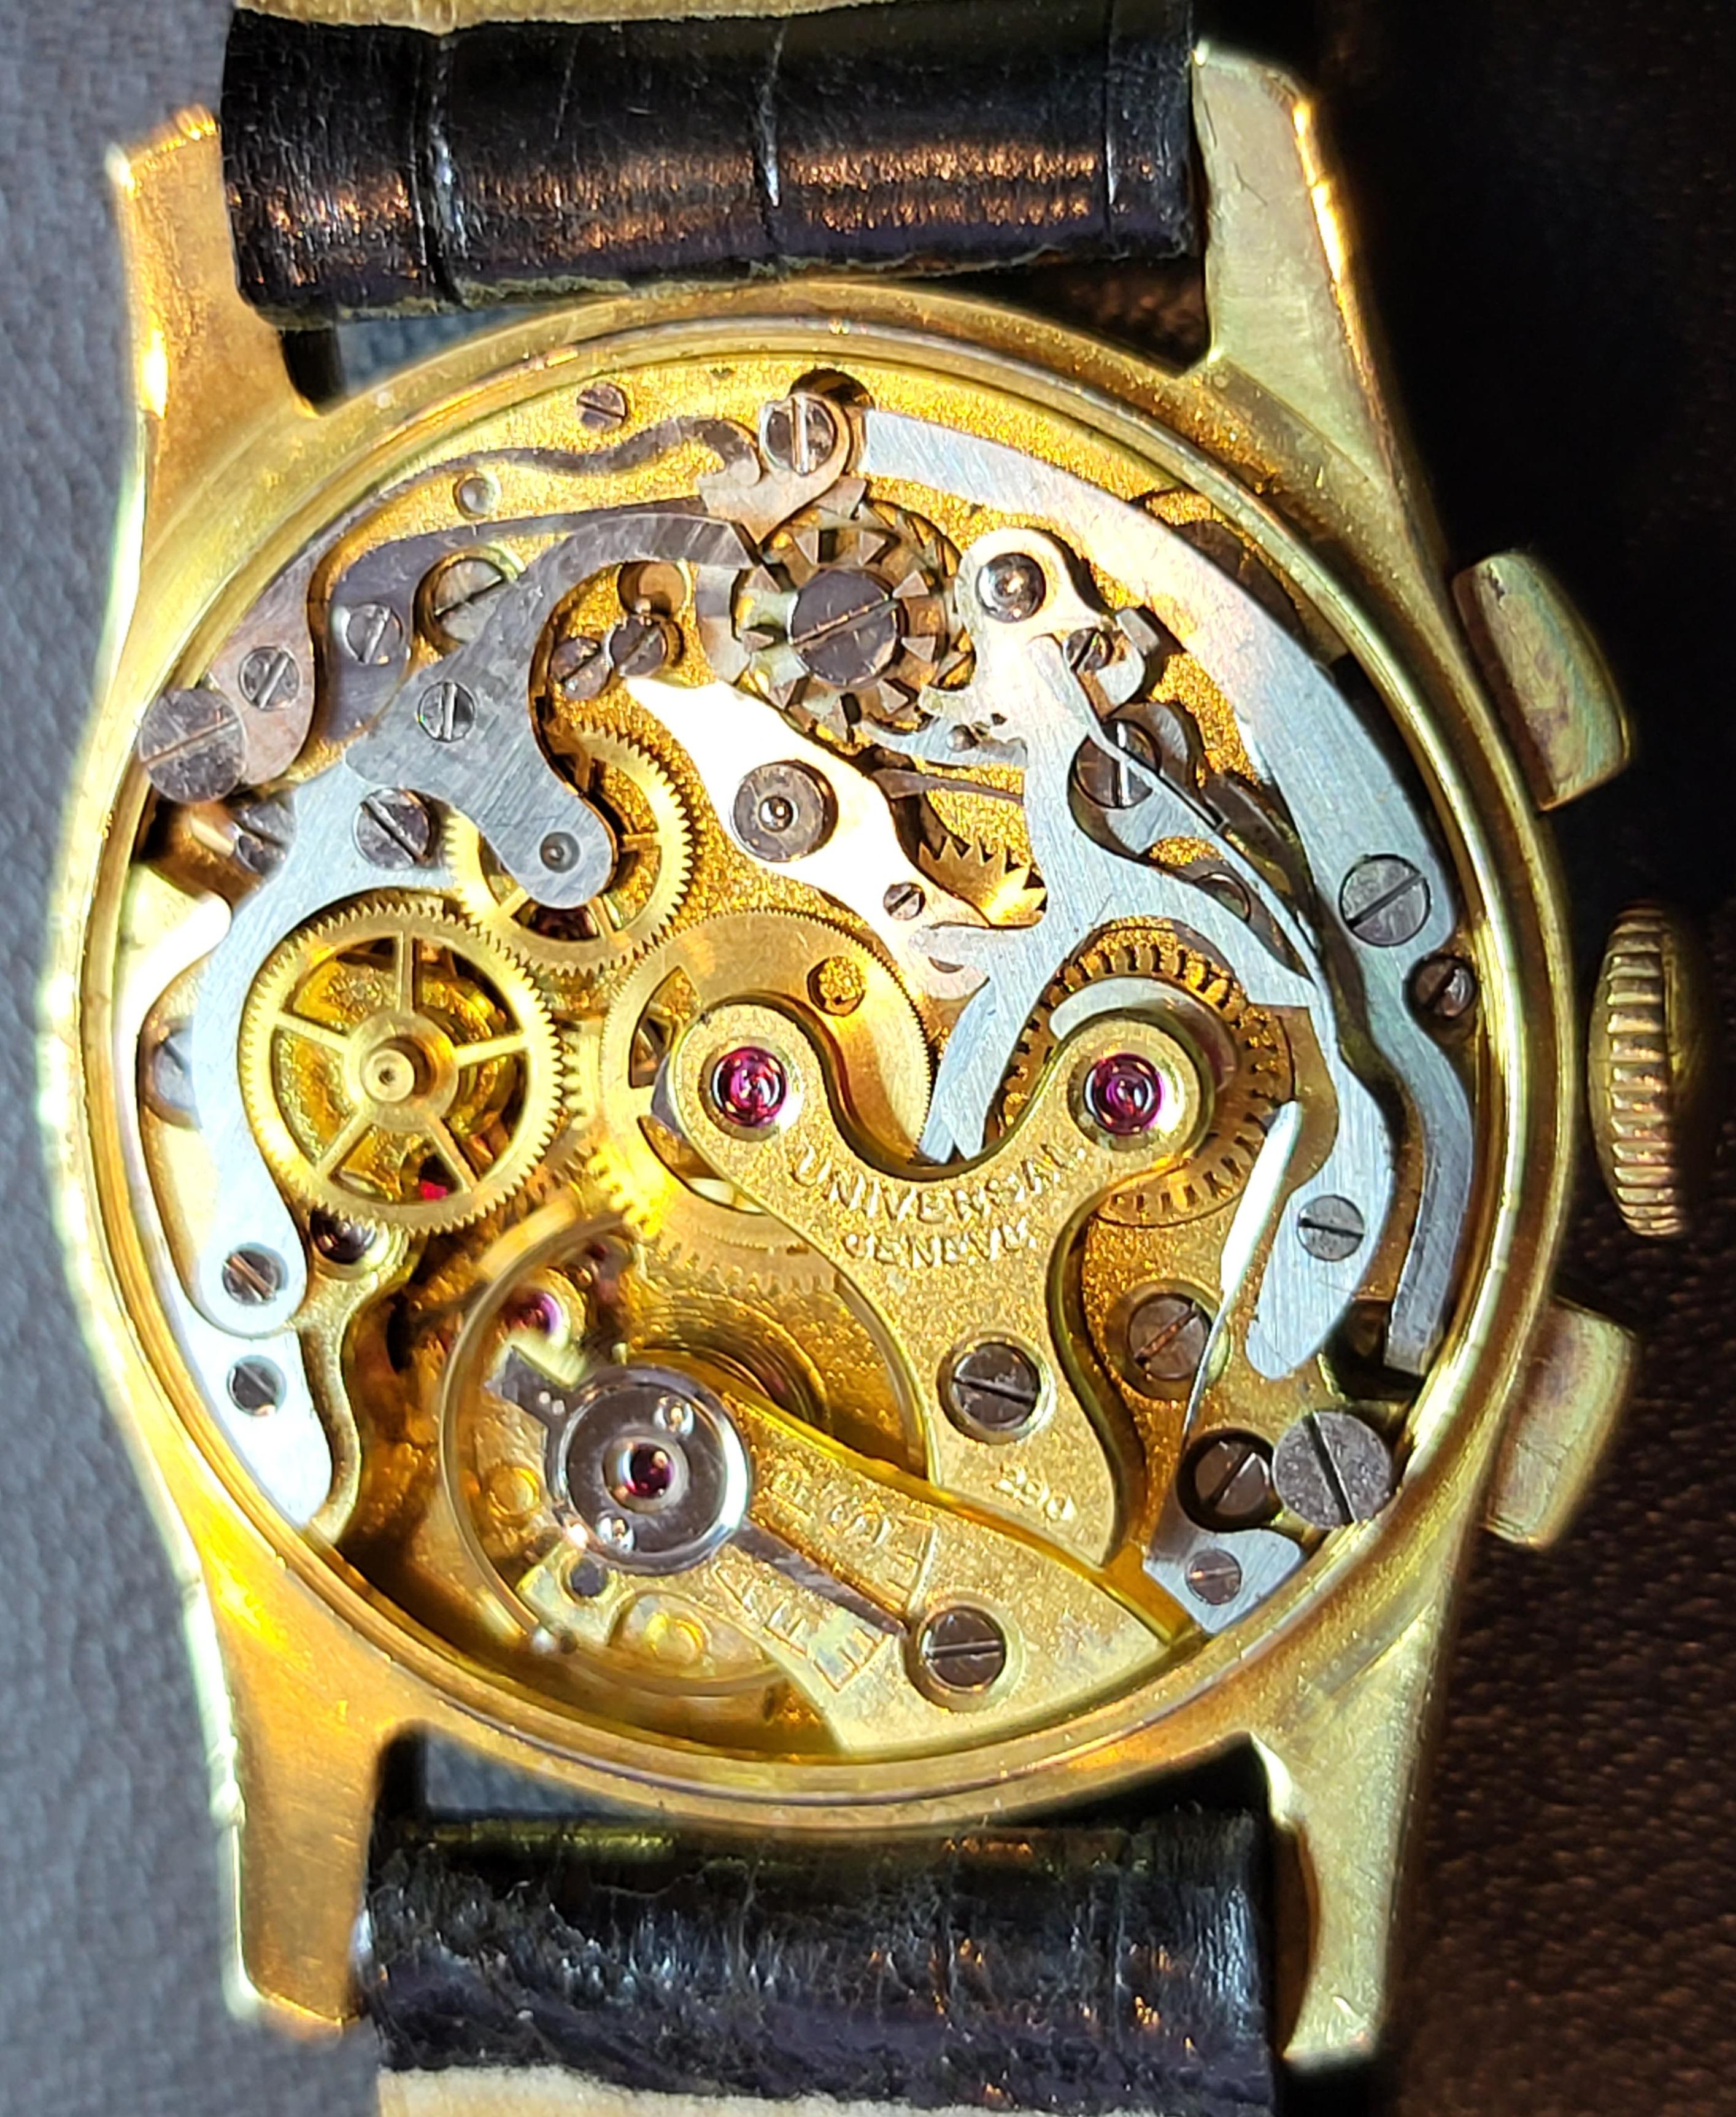 18kt Yellow Gold Universal Geneve Chronograph Watch, Extremy Rare For Sale 10